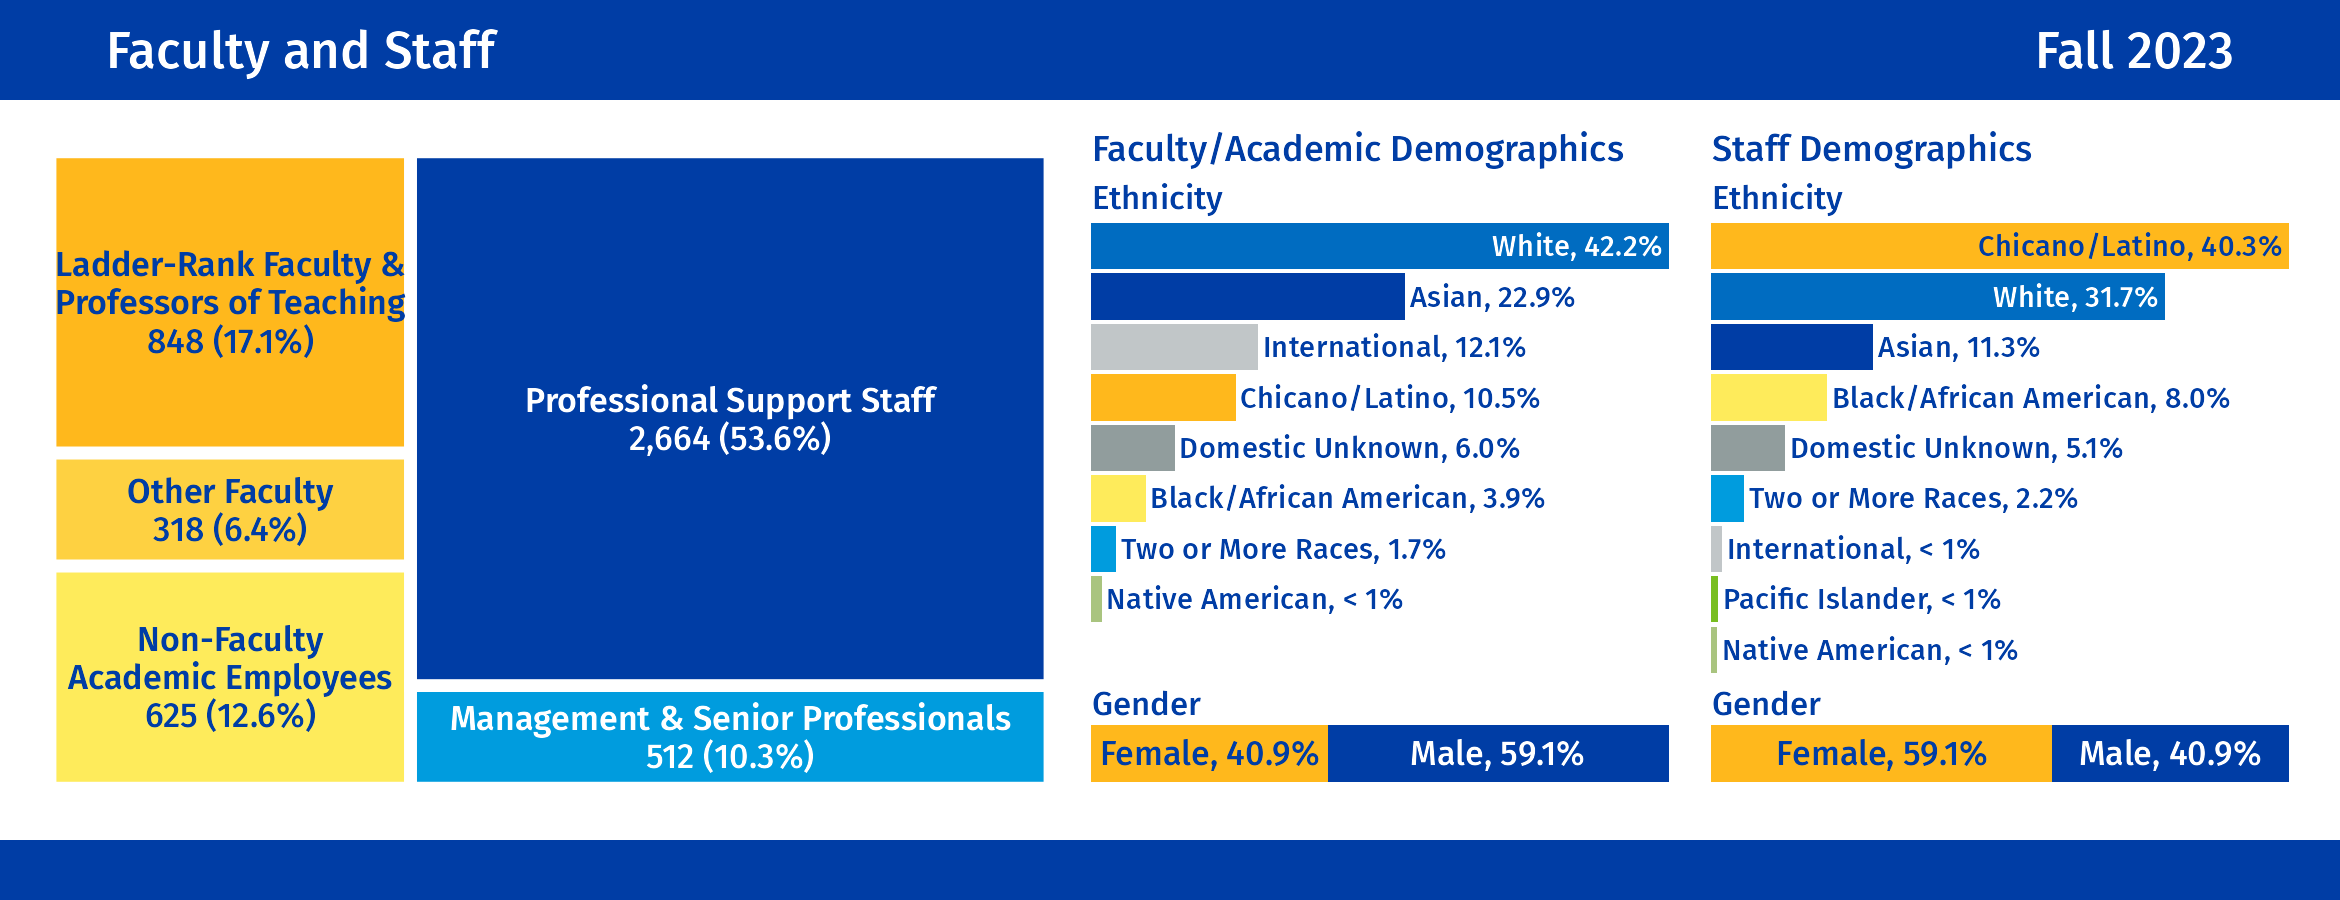 Faculty and Staff: For additional details, click to view our Faculty and Staff dashboards.